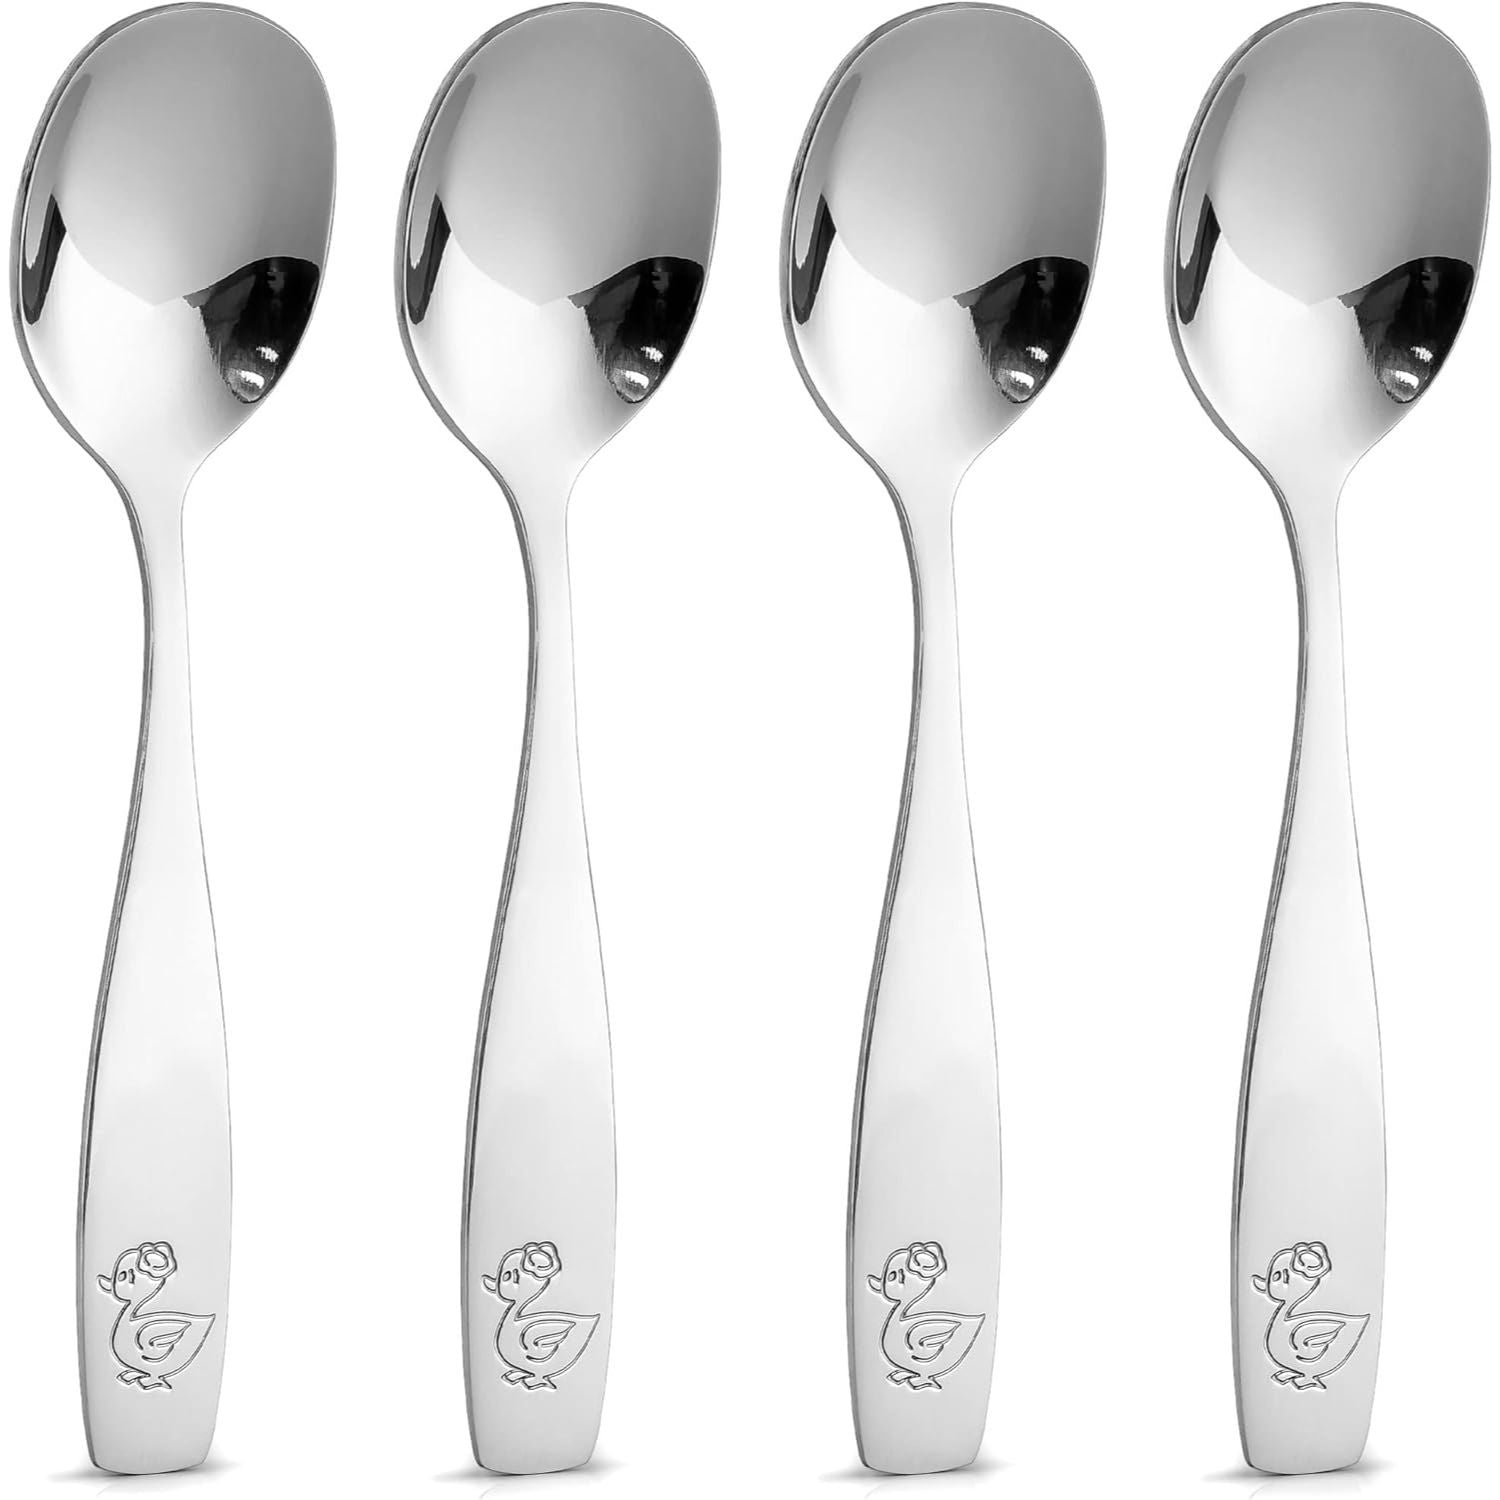 Zulay Kitchen 6 Pack Silicone Soft Baby Spoons, First Stage Gum